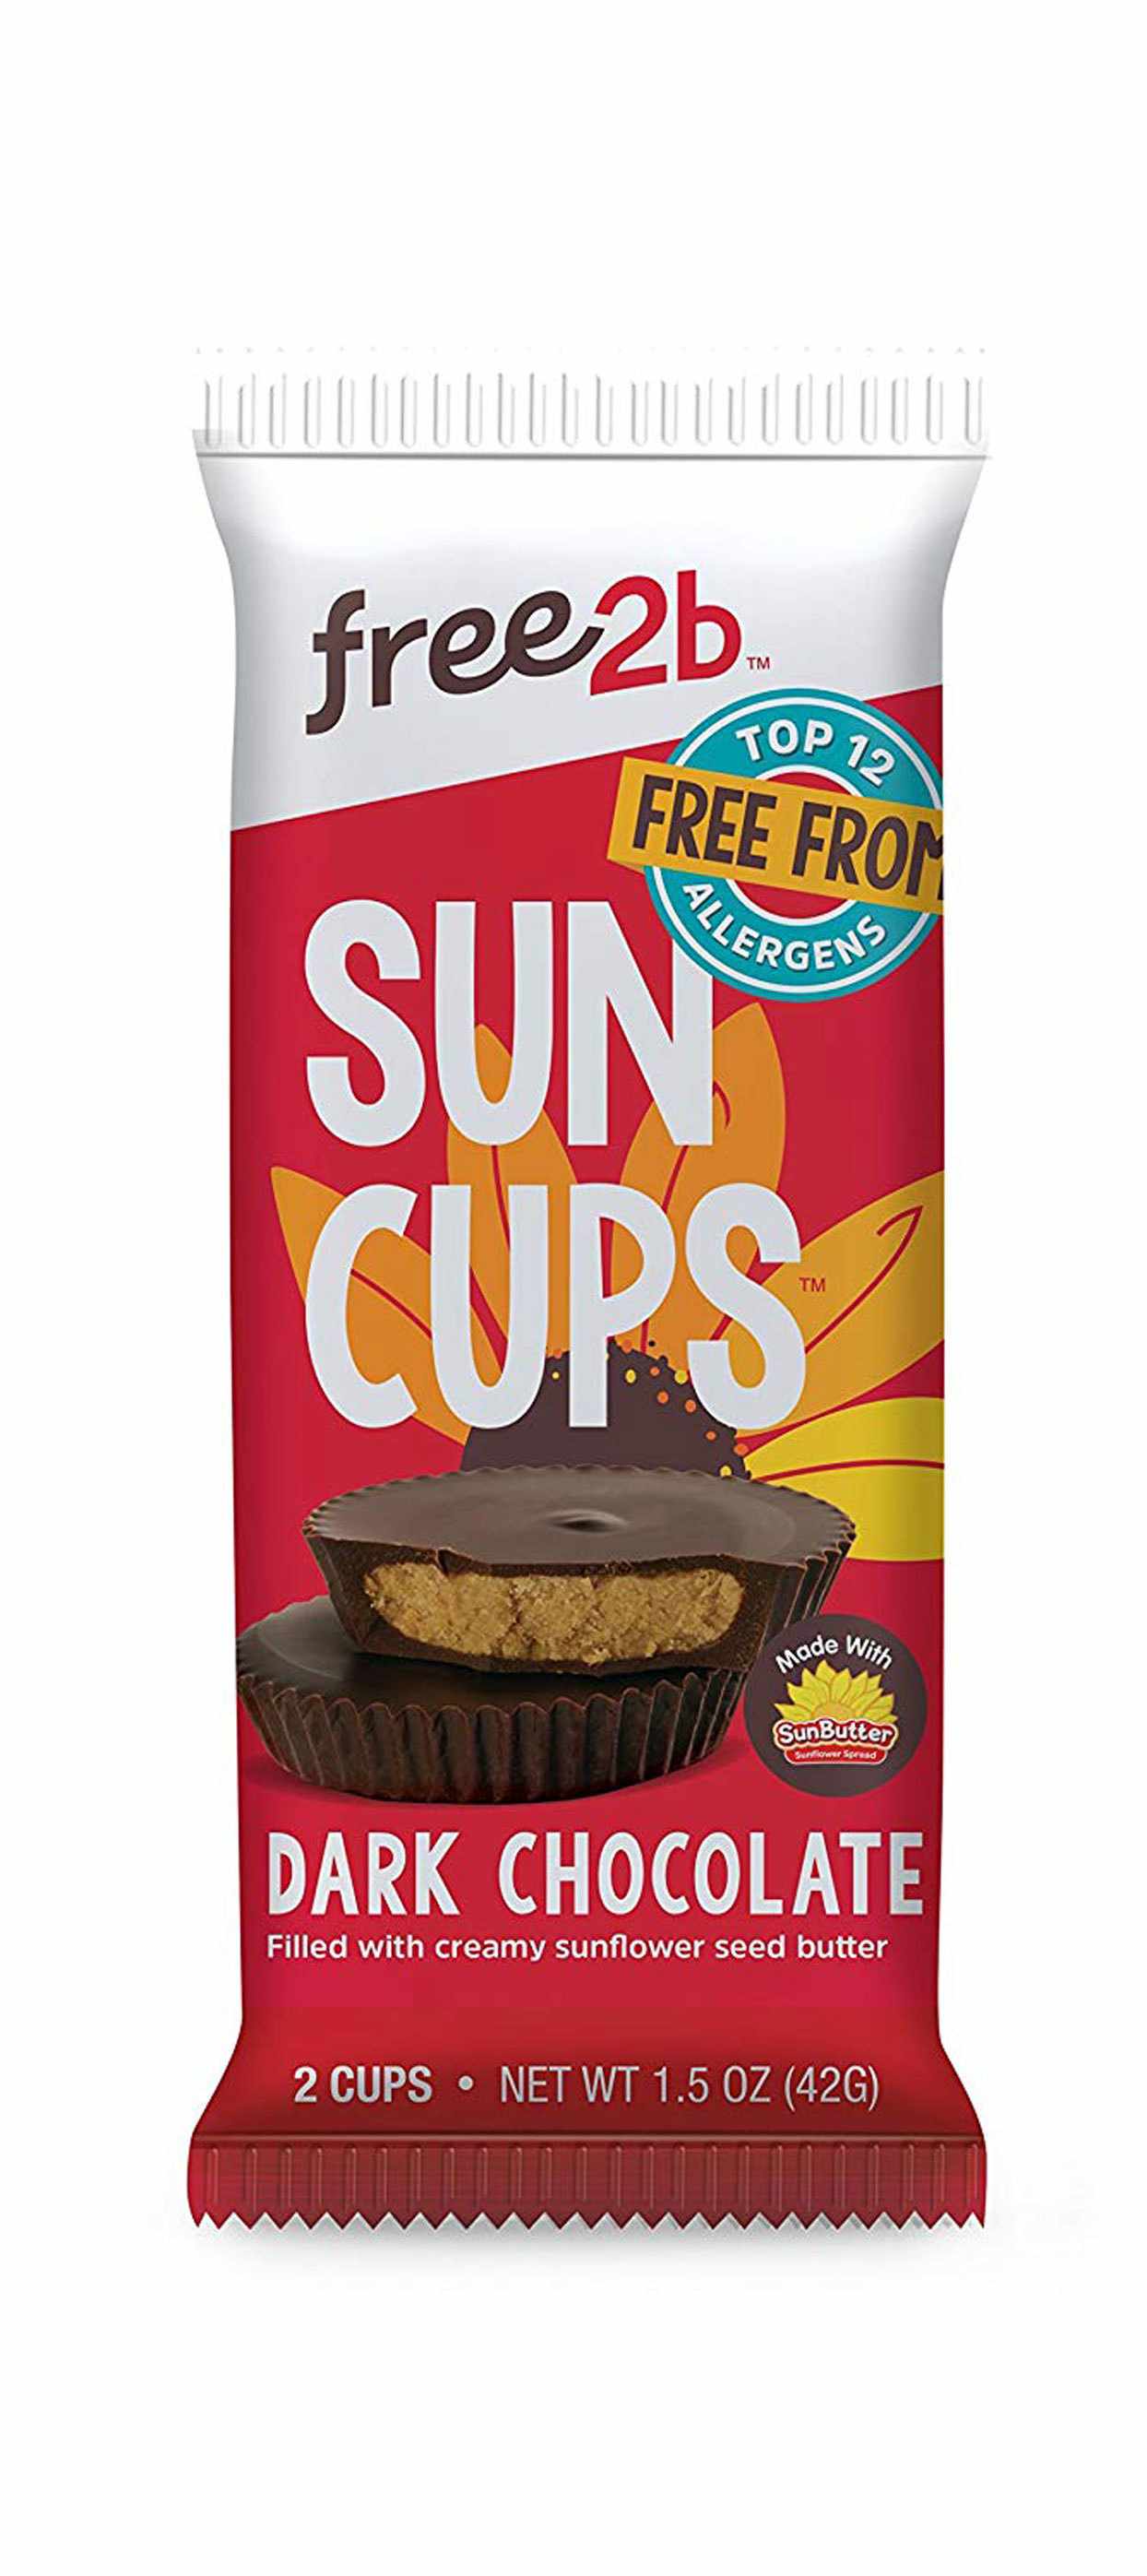 Free2b Sun Cups - dark chocolate filled with sunflower seed butter